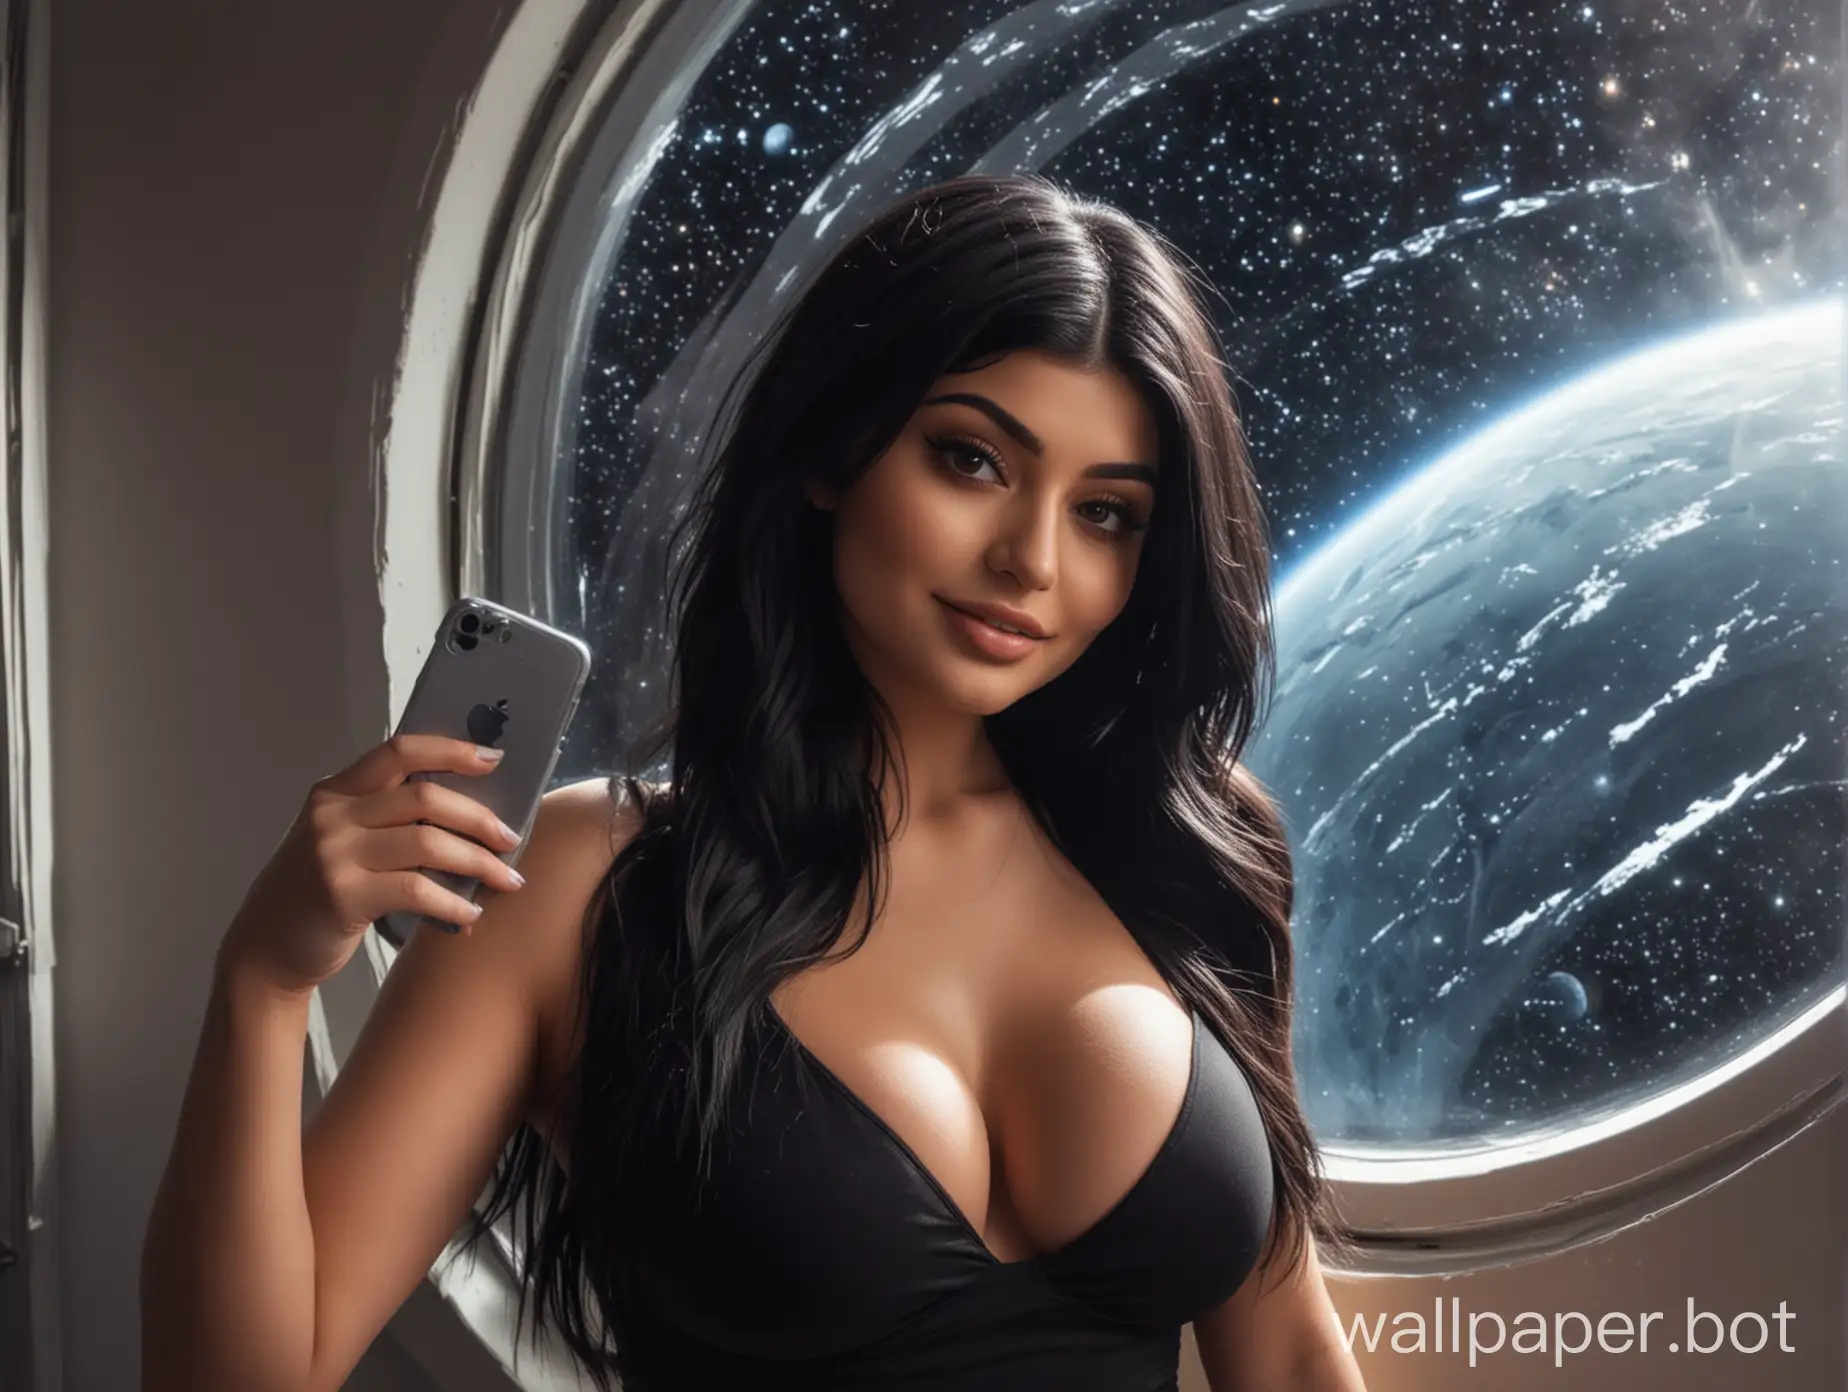 kylie jenner taking selfie of herself,  Science-Fiction, curvy female bodyshape showing cleavage, stars and planet through a window in the background, black shoulder long hair, natural black eyes, open smiling with showing teeth